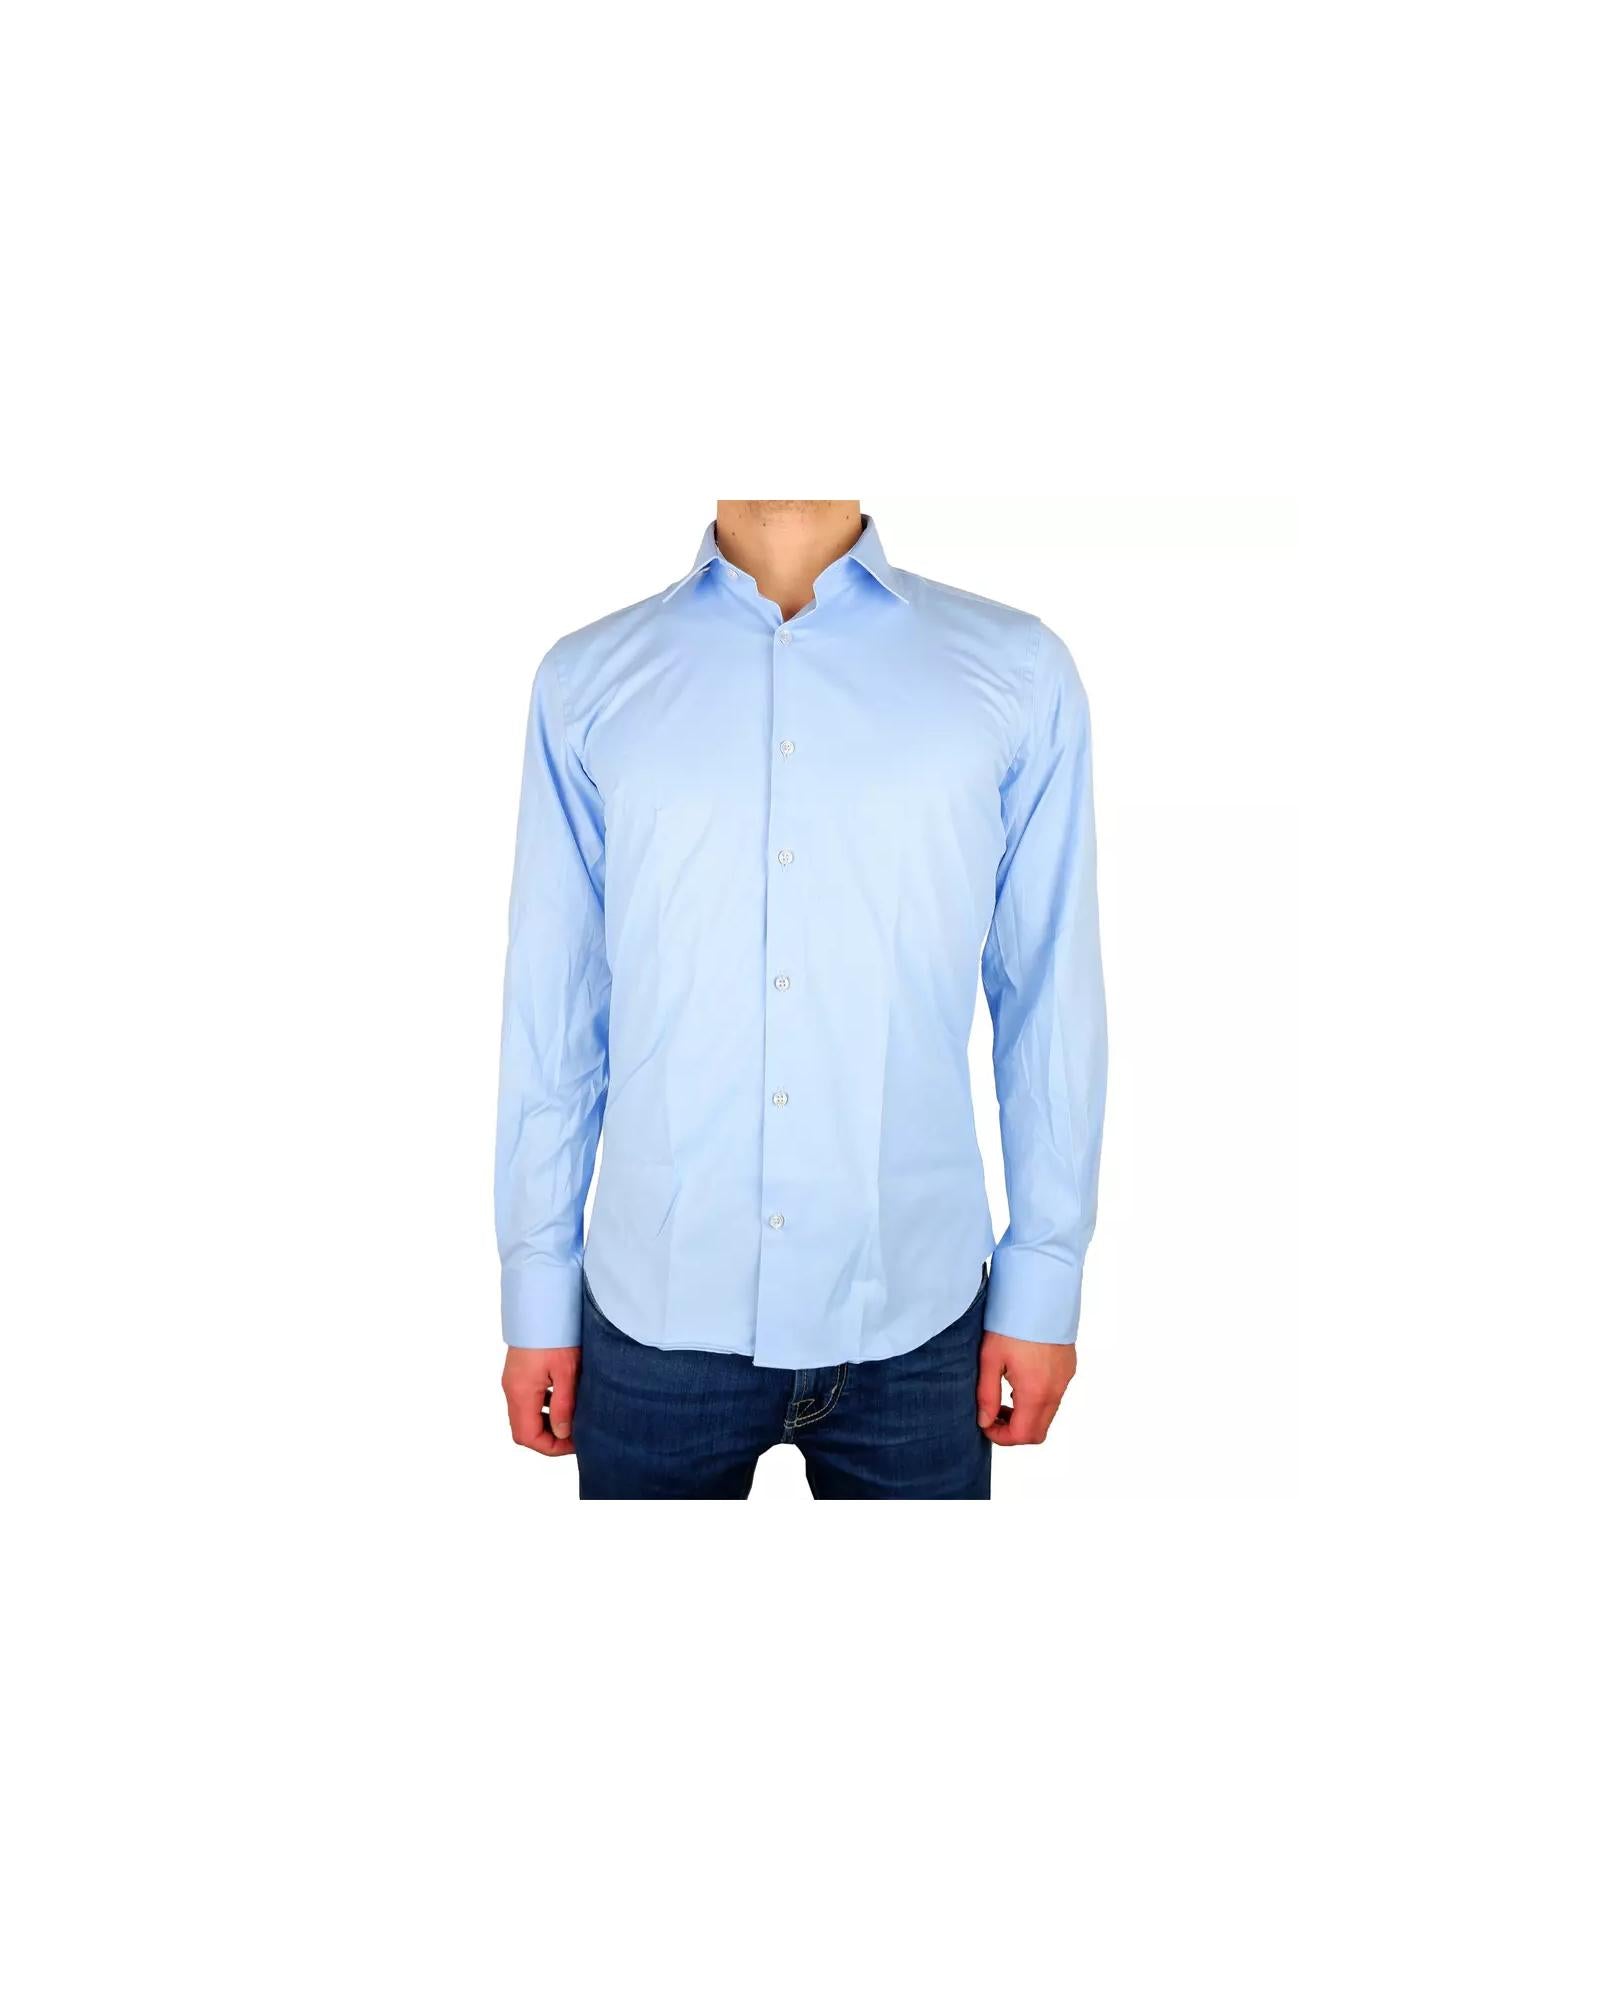 Milano Solid Color Shirt in Light Blue - Soft Satin Fabric - 100% Cotton 40 IT Men